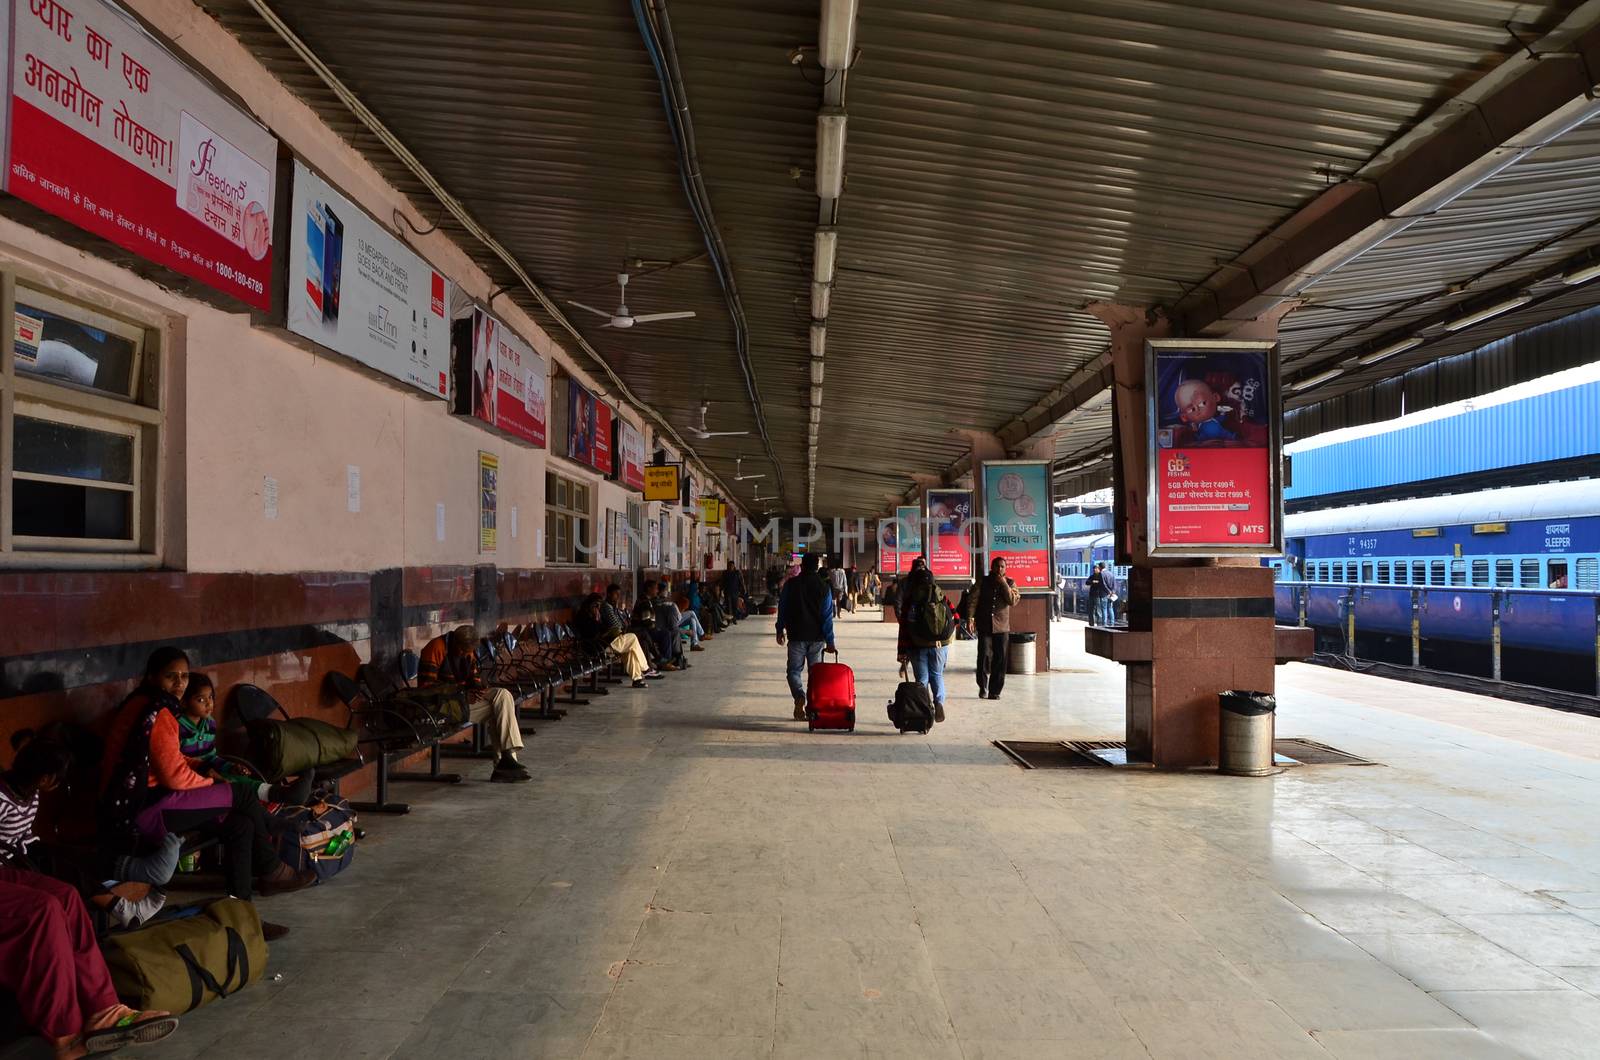 Jaipur, India - January 3, 2015: Crowd on platforms at the railway station of Jaipur, Rajasthan, India. Indian Railways carries about 7,500 million passengers annually.